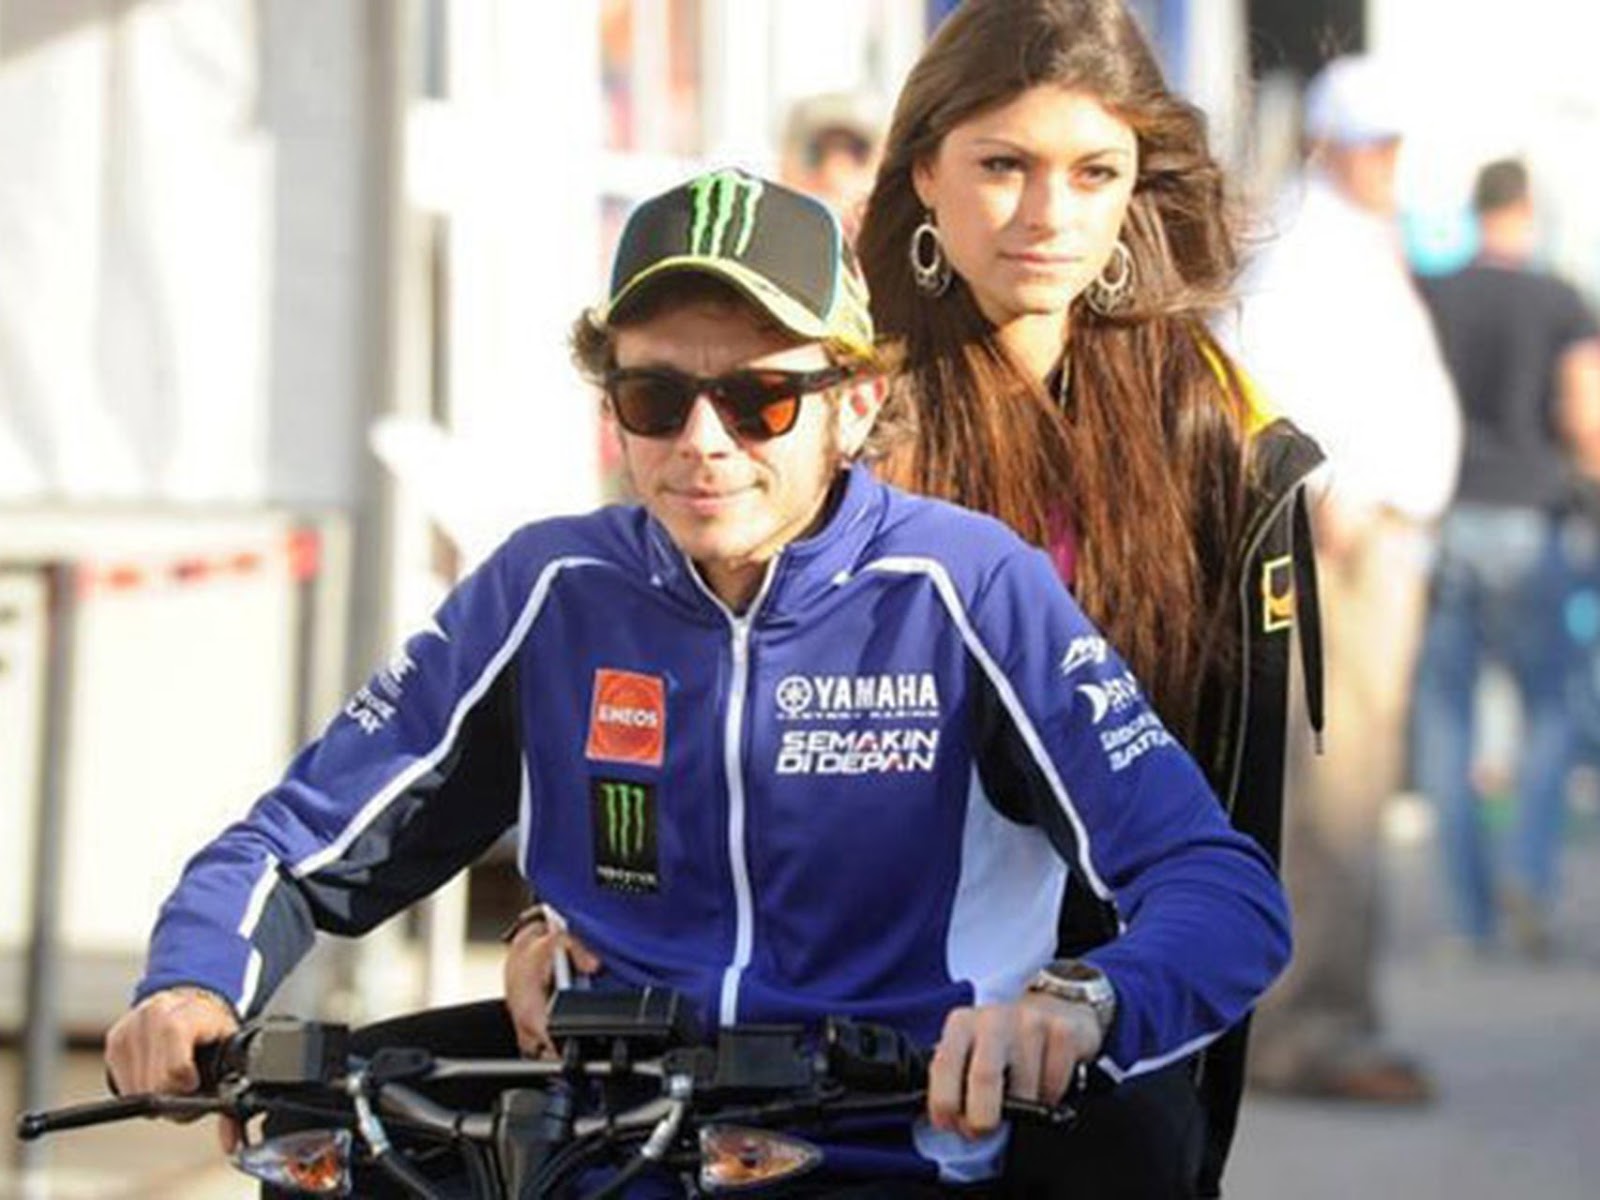 Konkurrere Pil Goneryl Who is Valentino Rossi's Wife or Girlfriend?